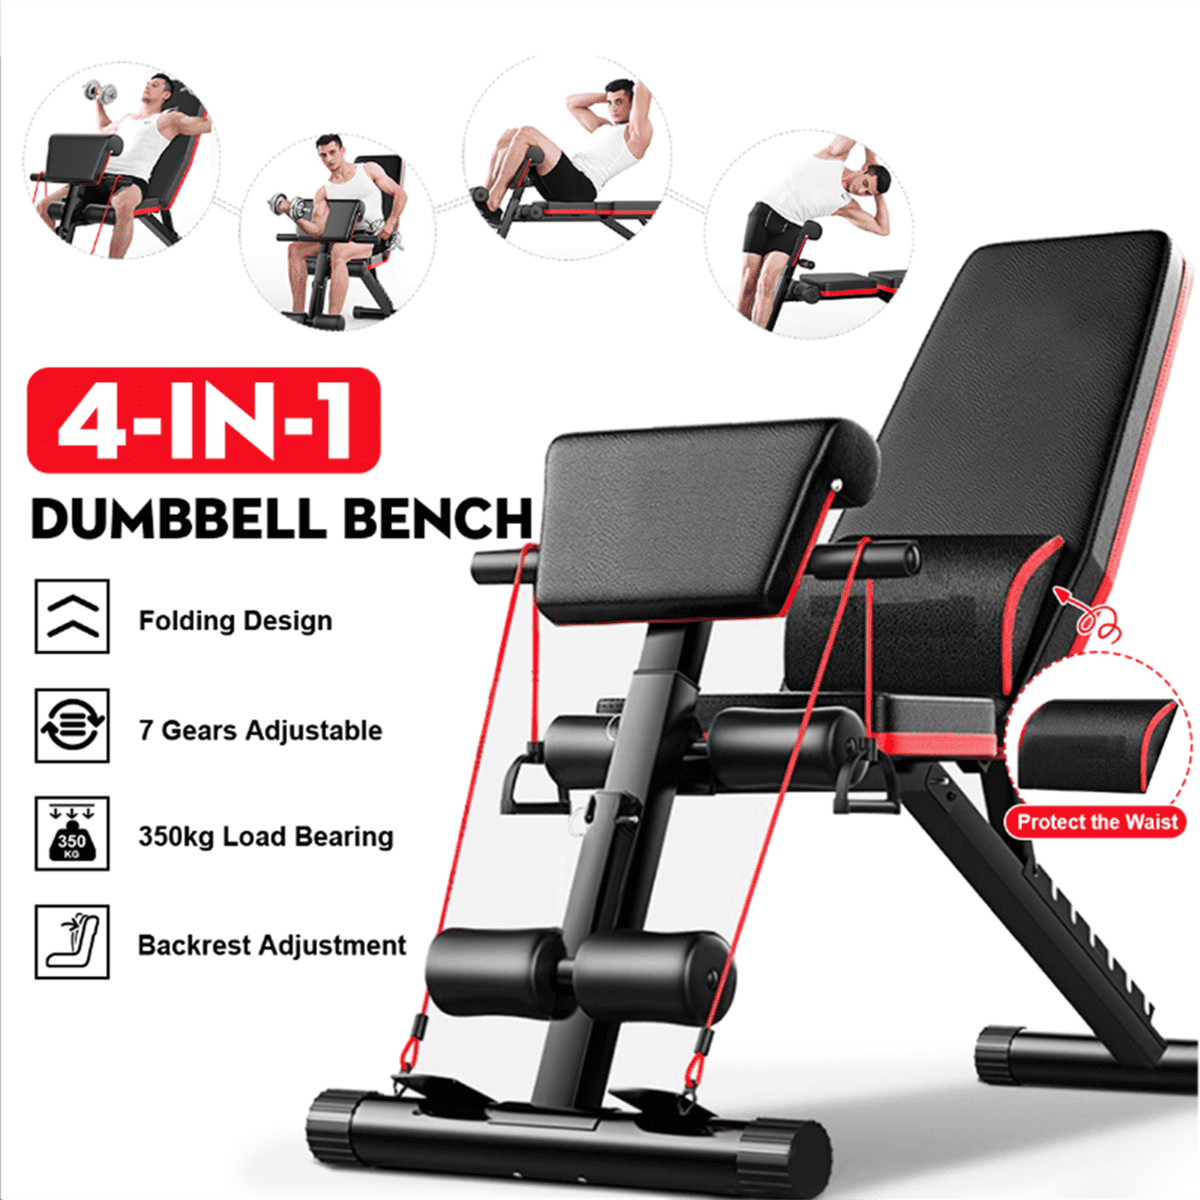 Utility Weight Benches for Full Body Workout Come with Exercise and Resistance Bands Set Exercise Training Bench Adjustable Sit-up/Push Up Bench Workout Flat/Incline/Decline Bench Press for Home Gym Weight Capacity NEWBUY 7 Levels Foldable Weight Bench